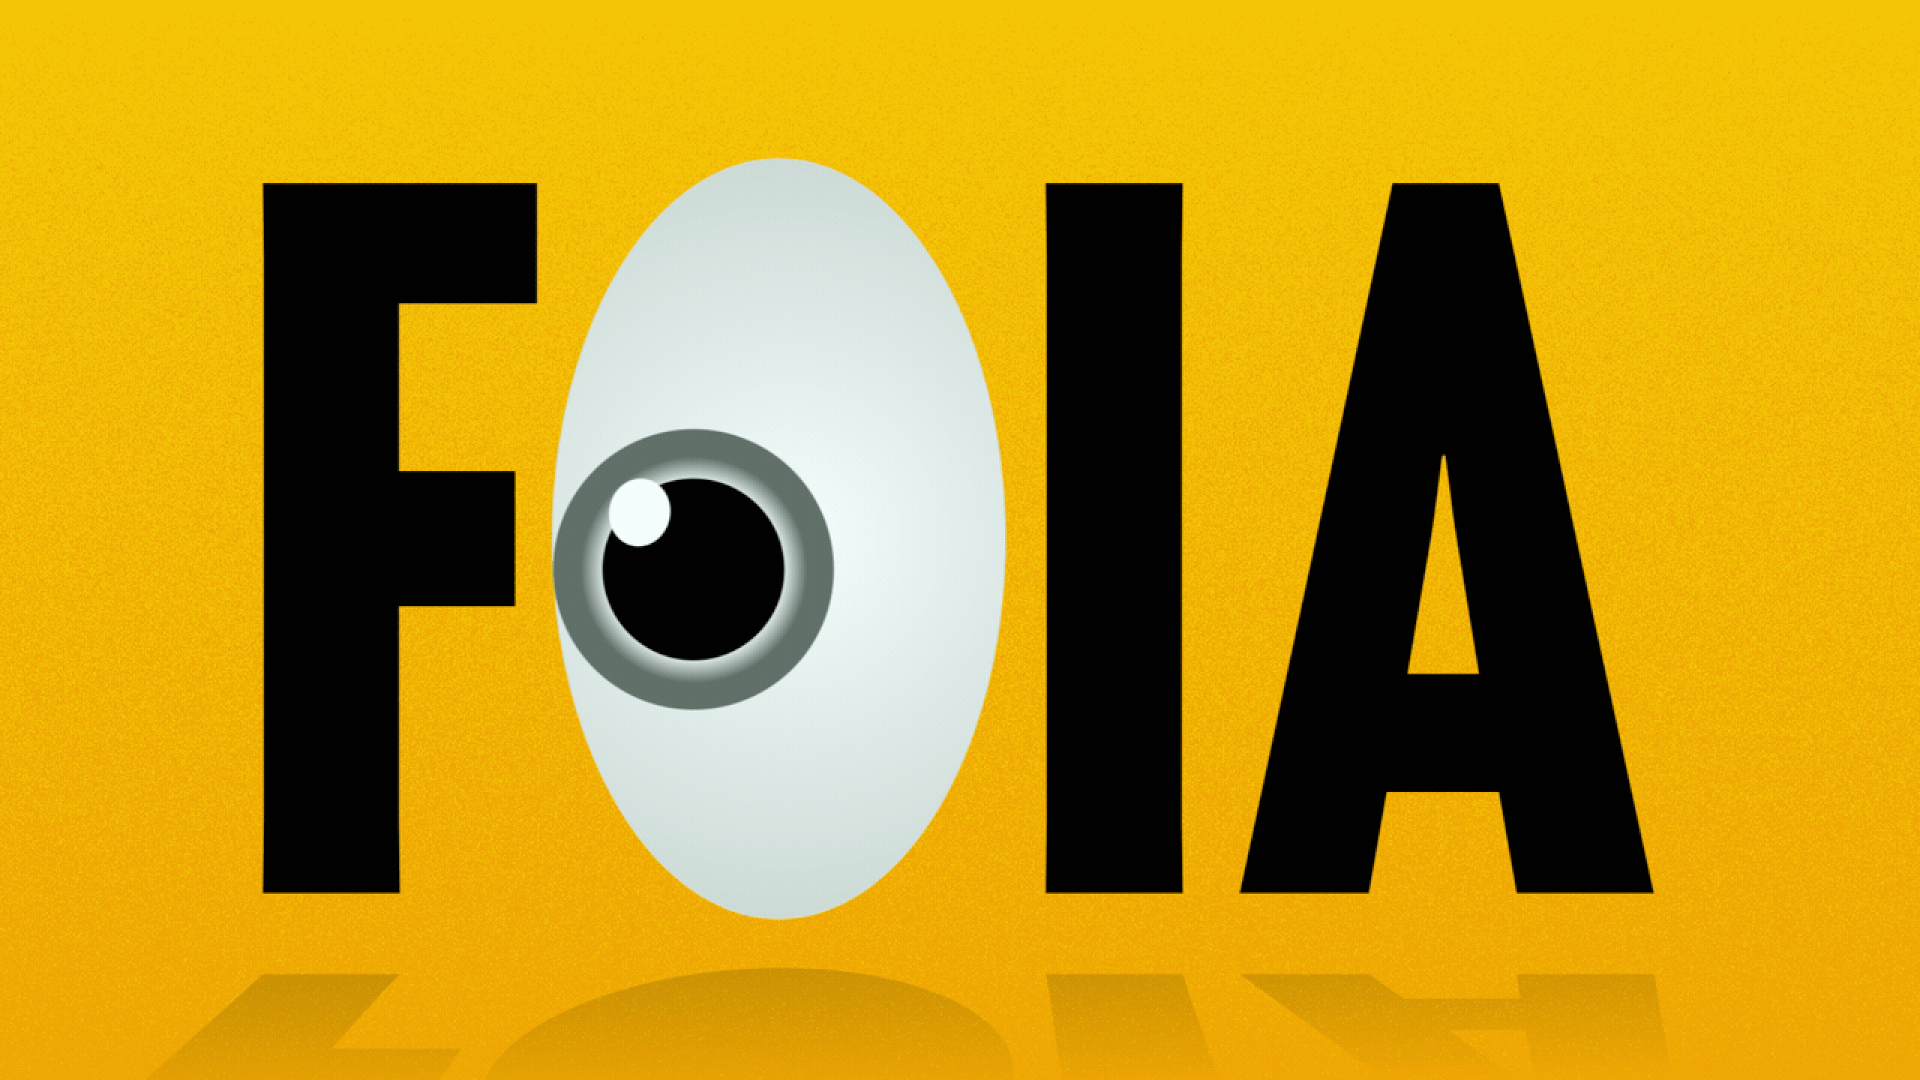 Illustration of the acronym FOIA with an eye that's looking around and blinking standing in for the O.